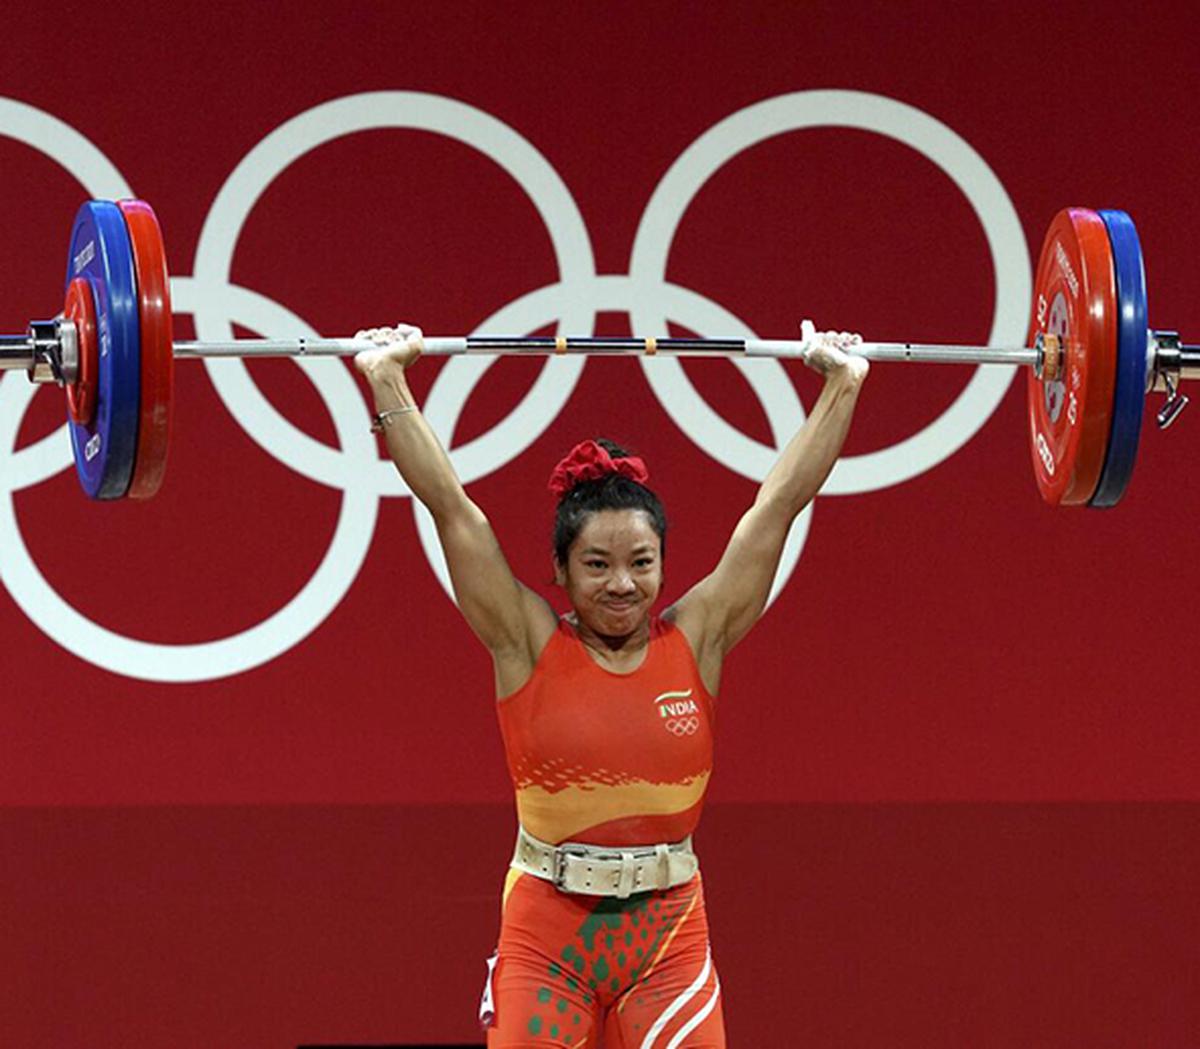 Mirabai Chanu at Commonwealth Games 2022 Preview, IST timings and where to watch